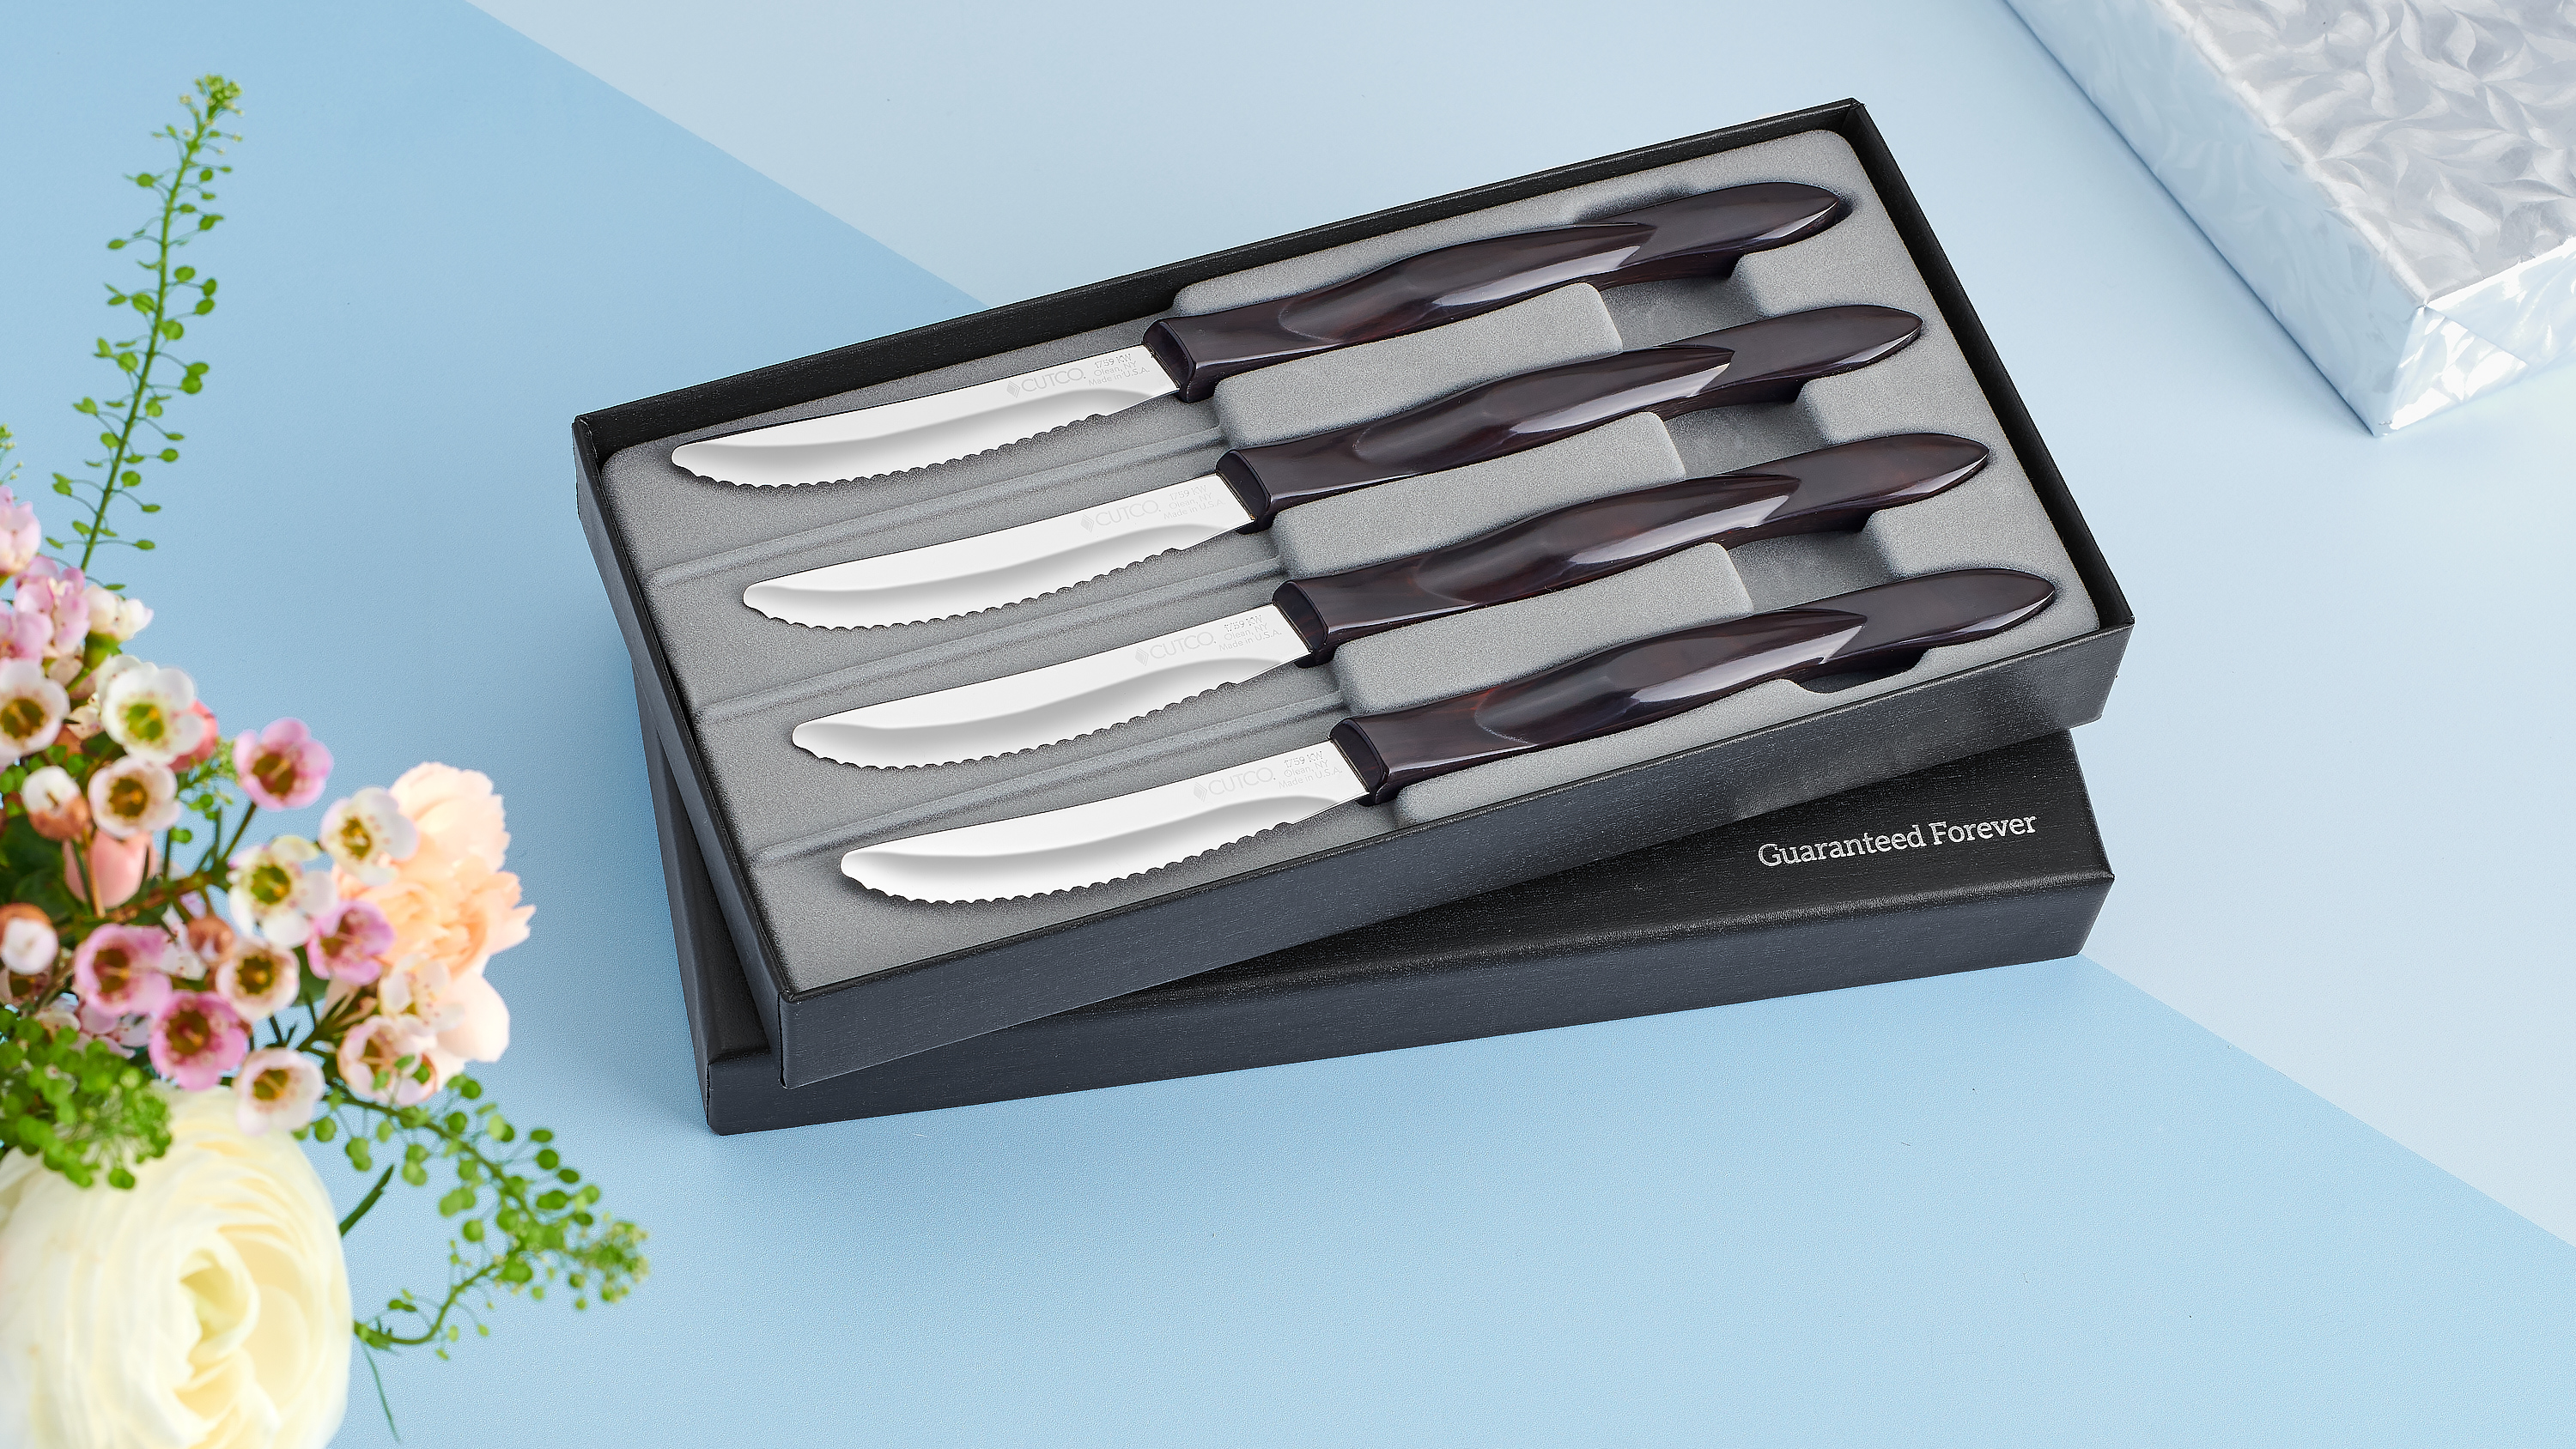 8-Pc. Table Knife Set | Gift-Boxed Sets by Cutco